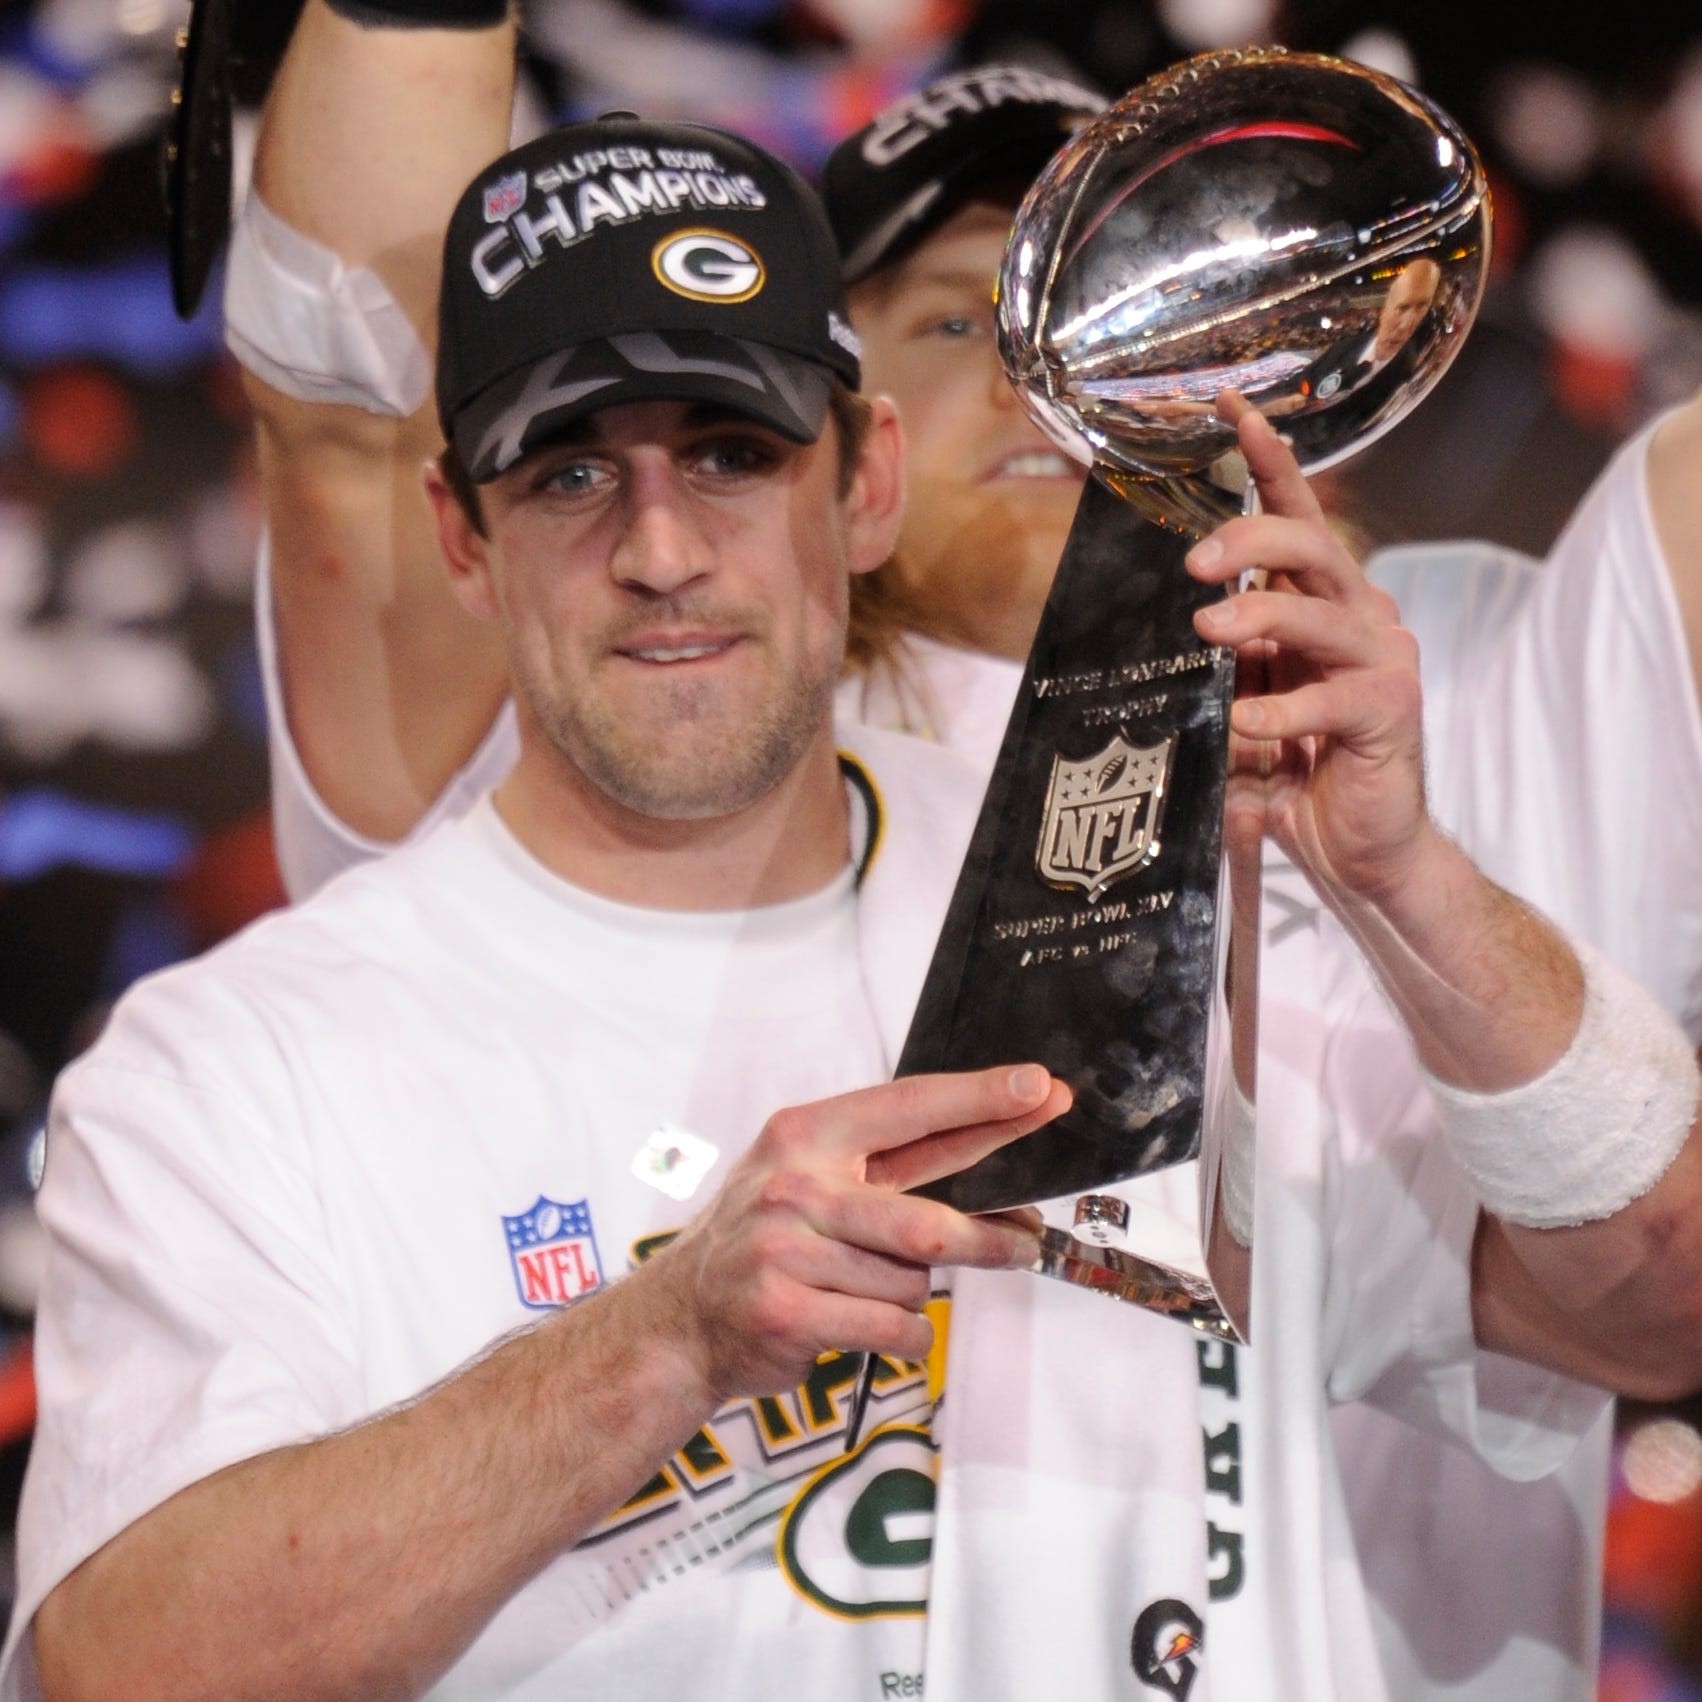 Aaron Rodgers holds the Lombardi Trophy after the Green Bay Packers won Super Bowl XLV.